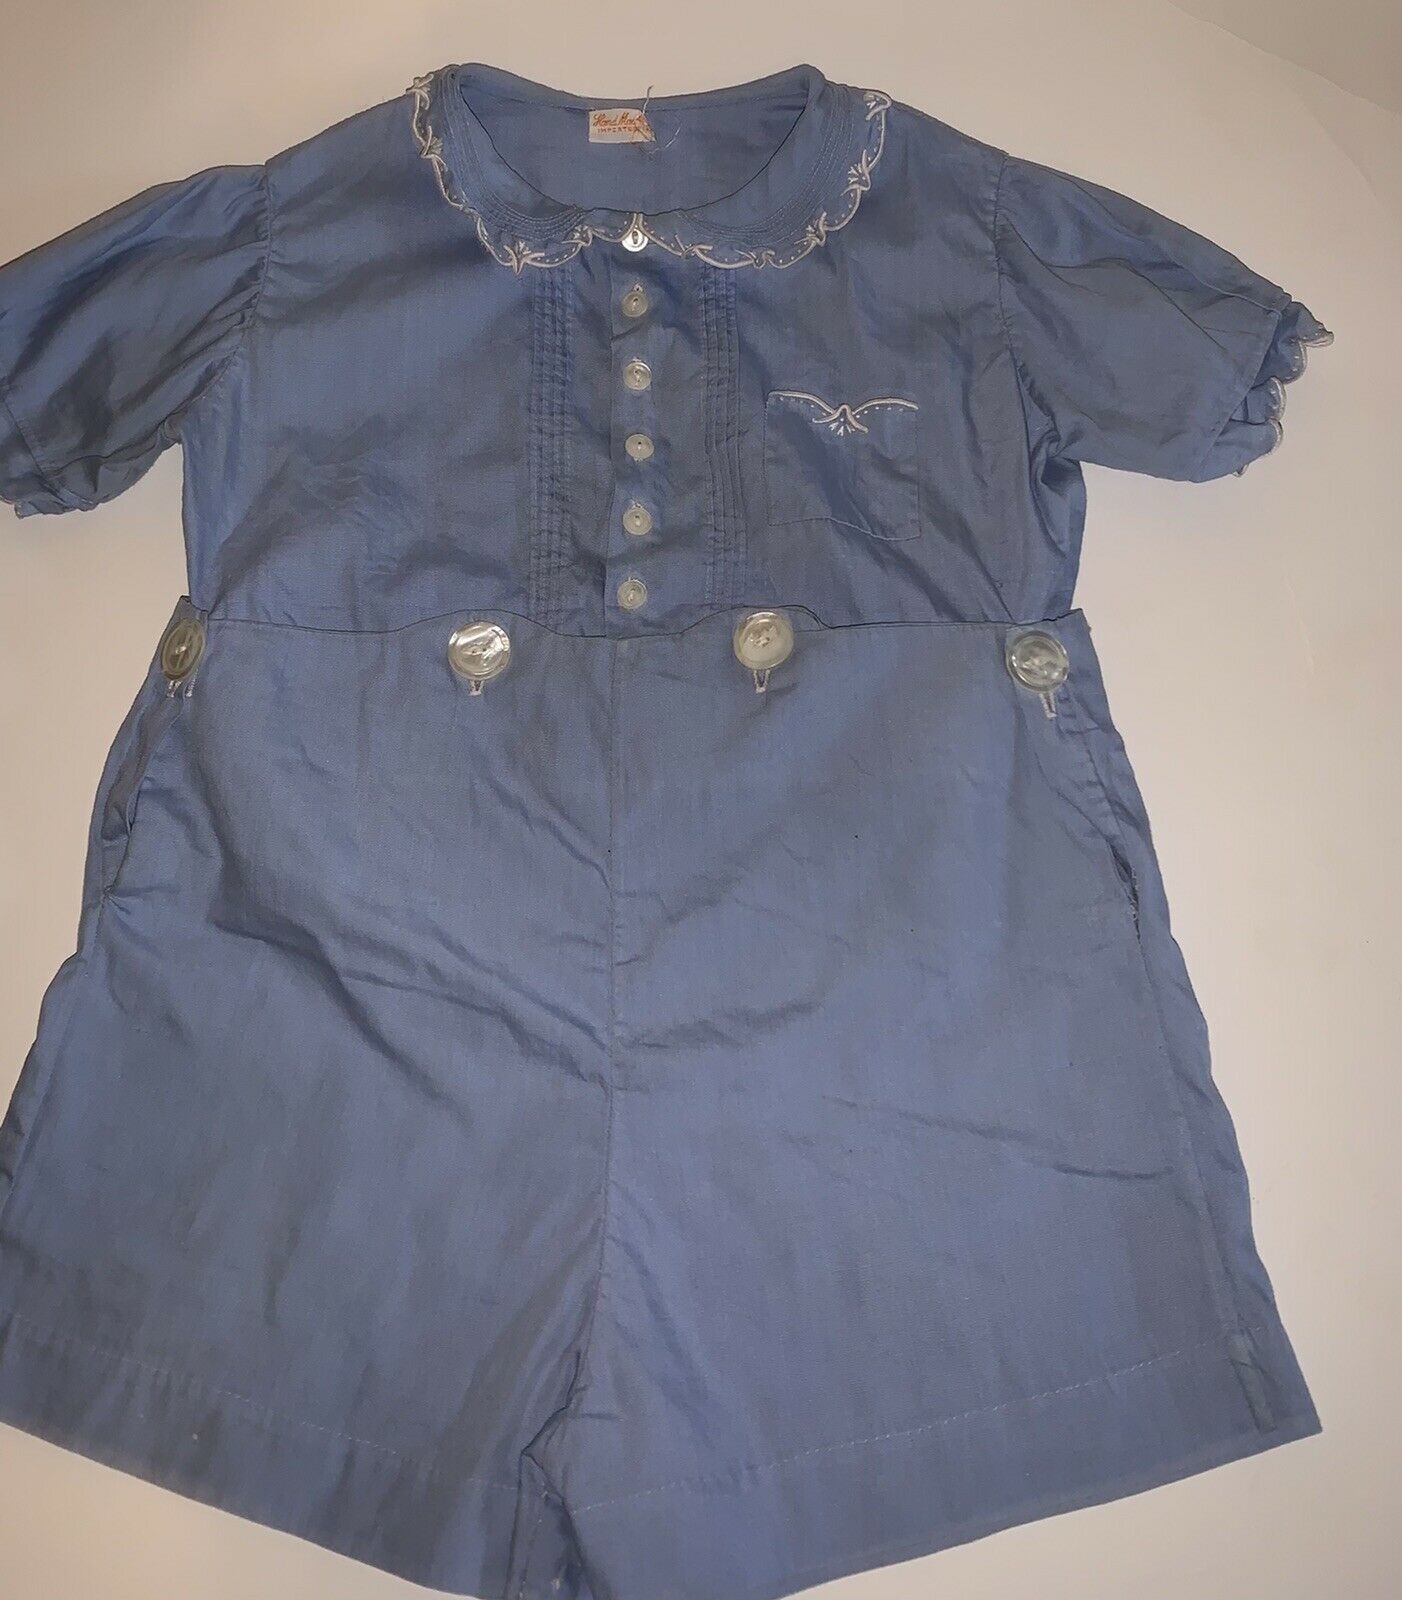 Vintage Baby Outfit Blue Hand Made Imported Fancy Shirt Shorts Button Together